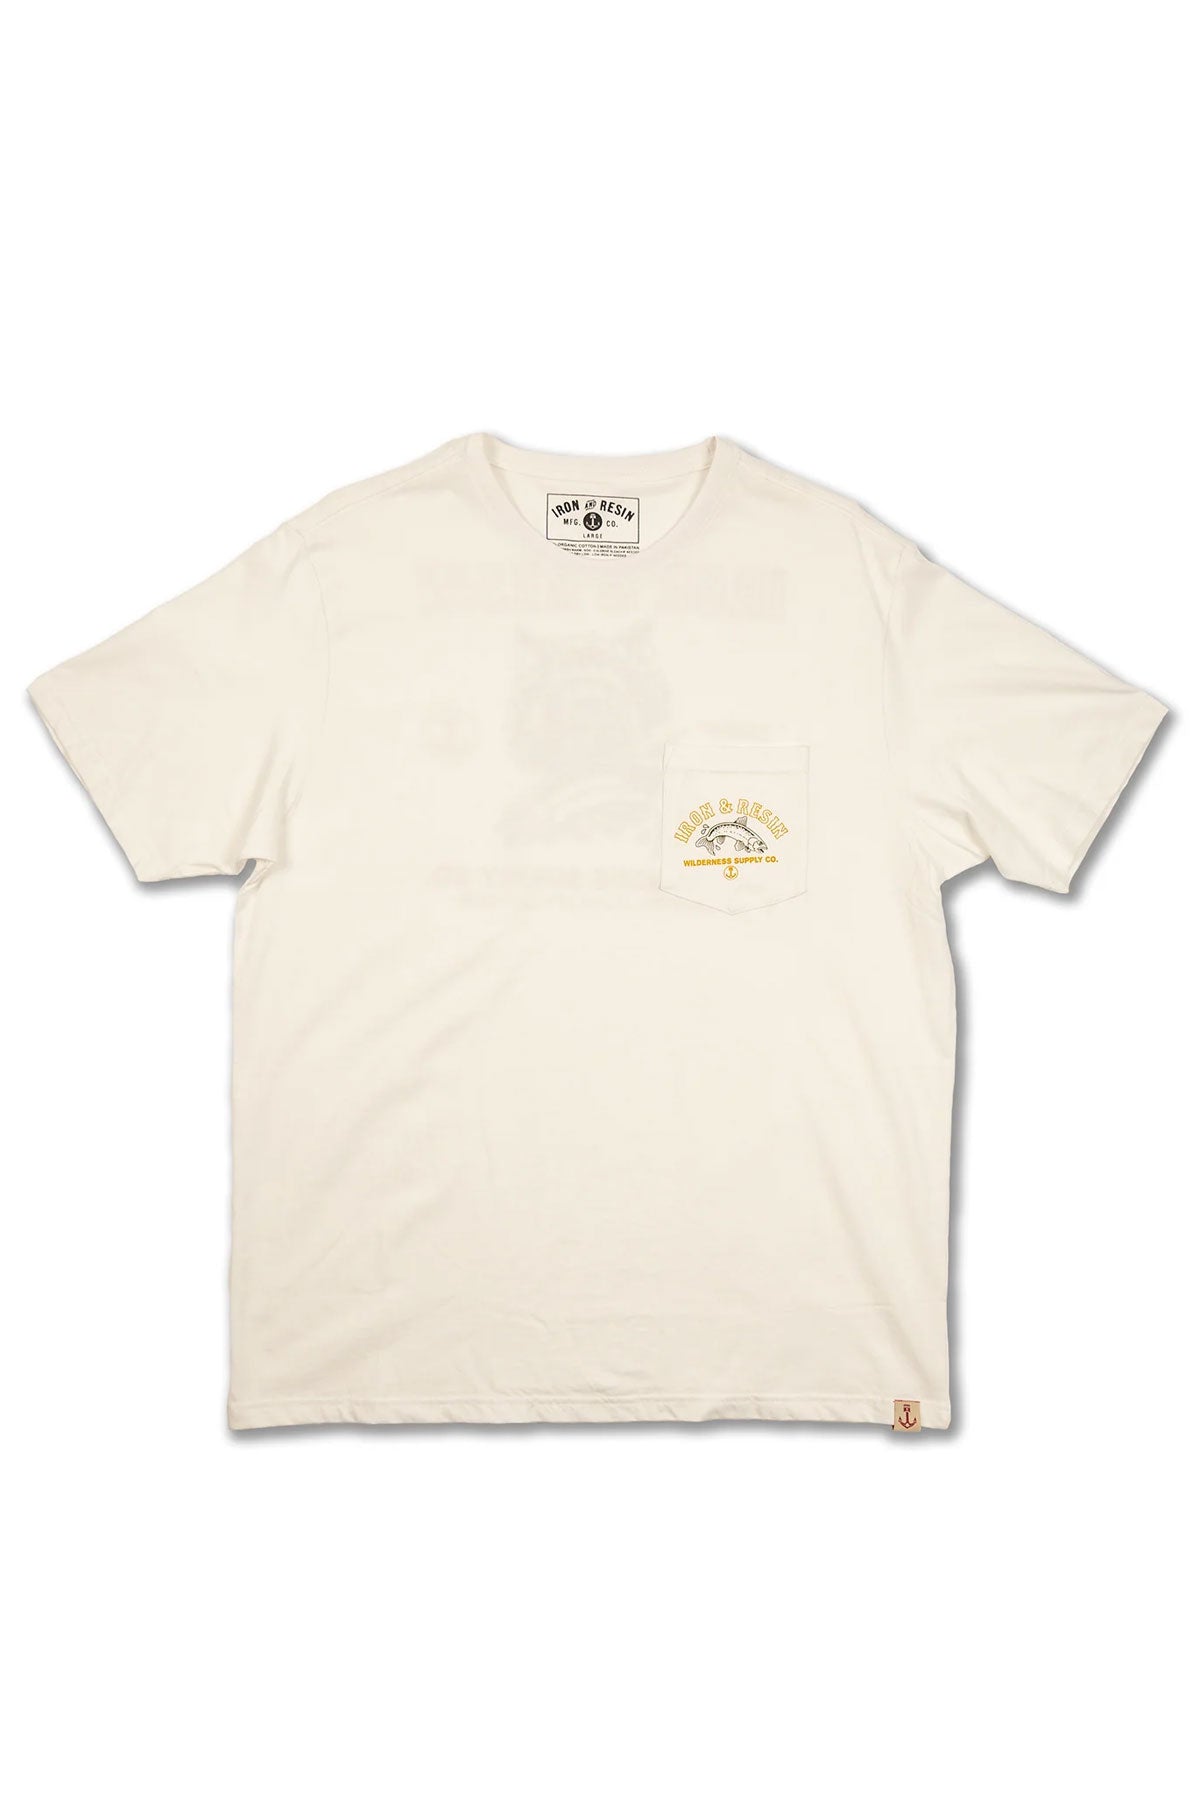 Iron And Resin - Fisher Wolf Pocket Tee - White